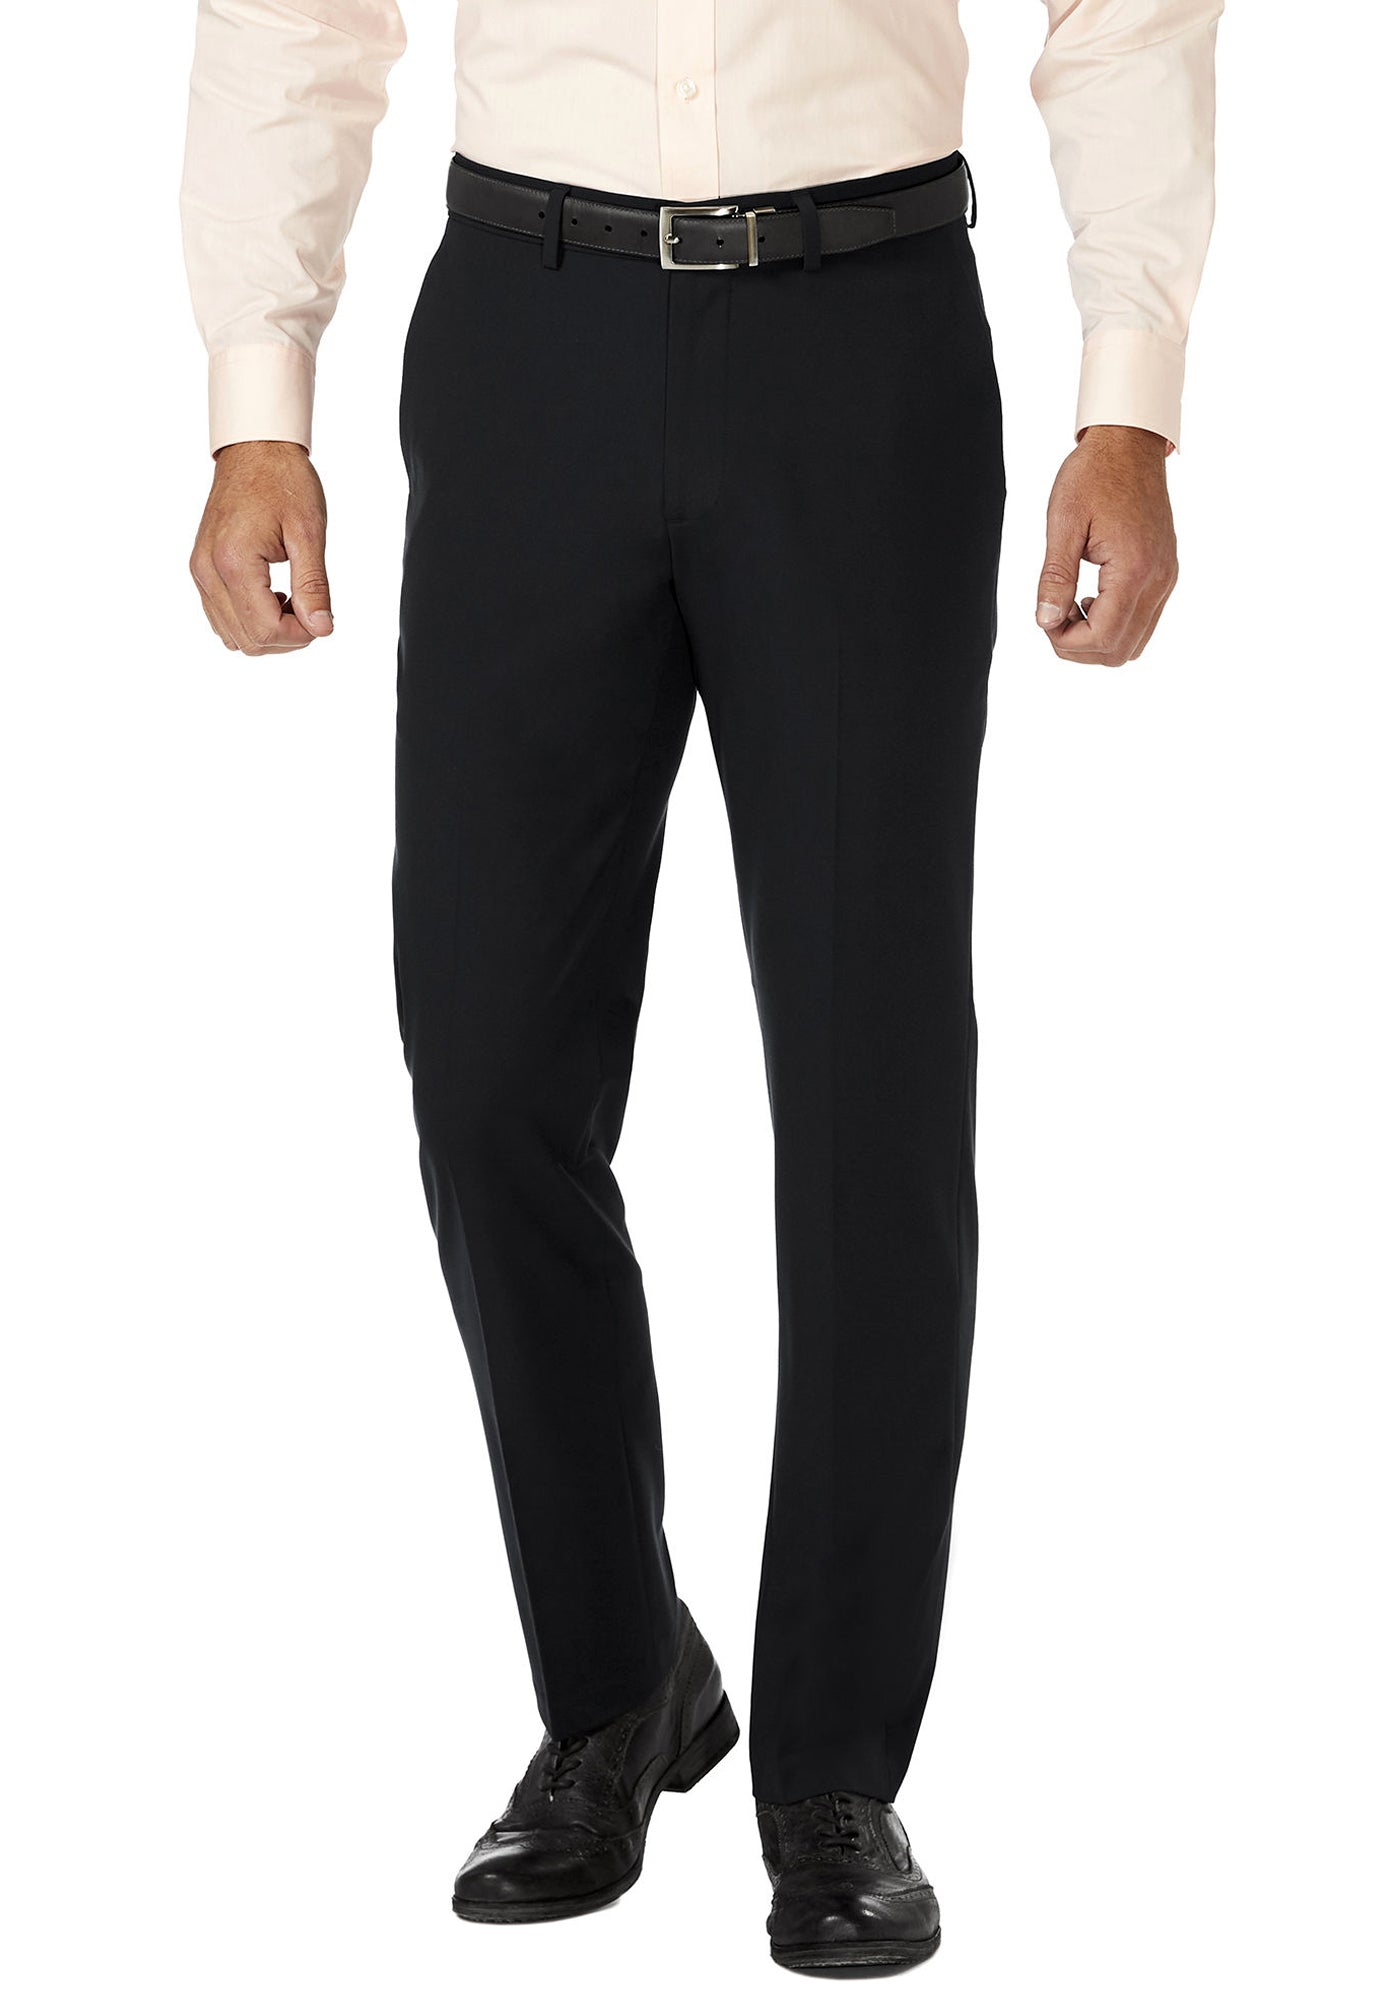 Shop Nayked Apparel Men's Ridiculously Soft Midweight Fleece Pant.